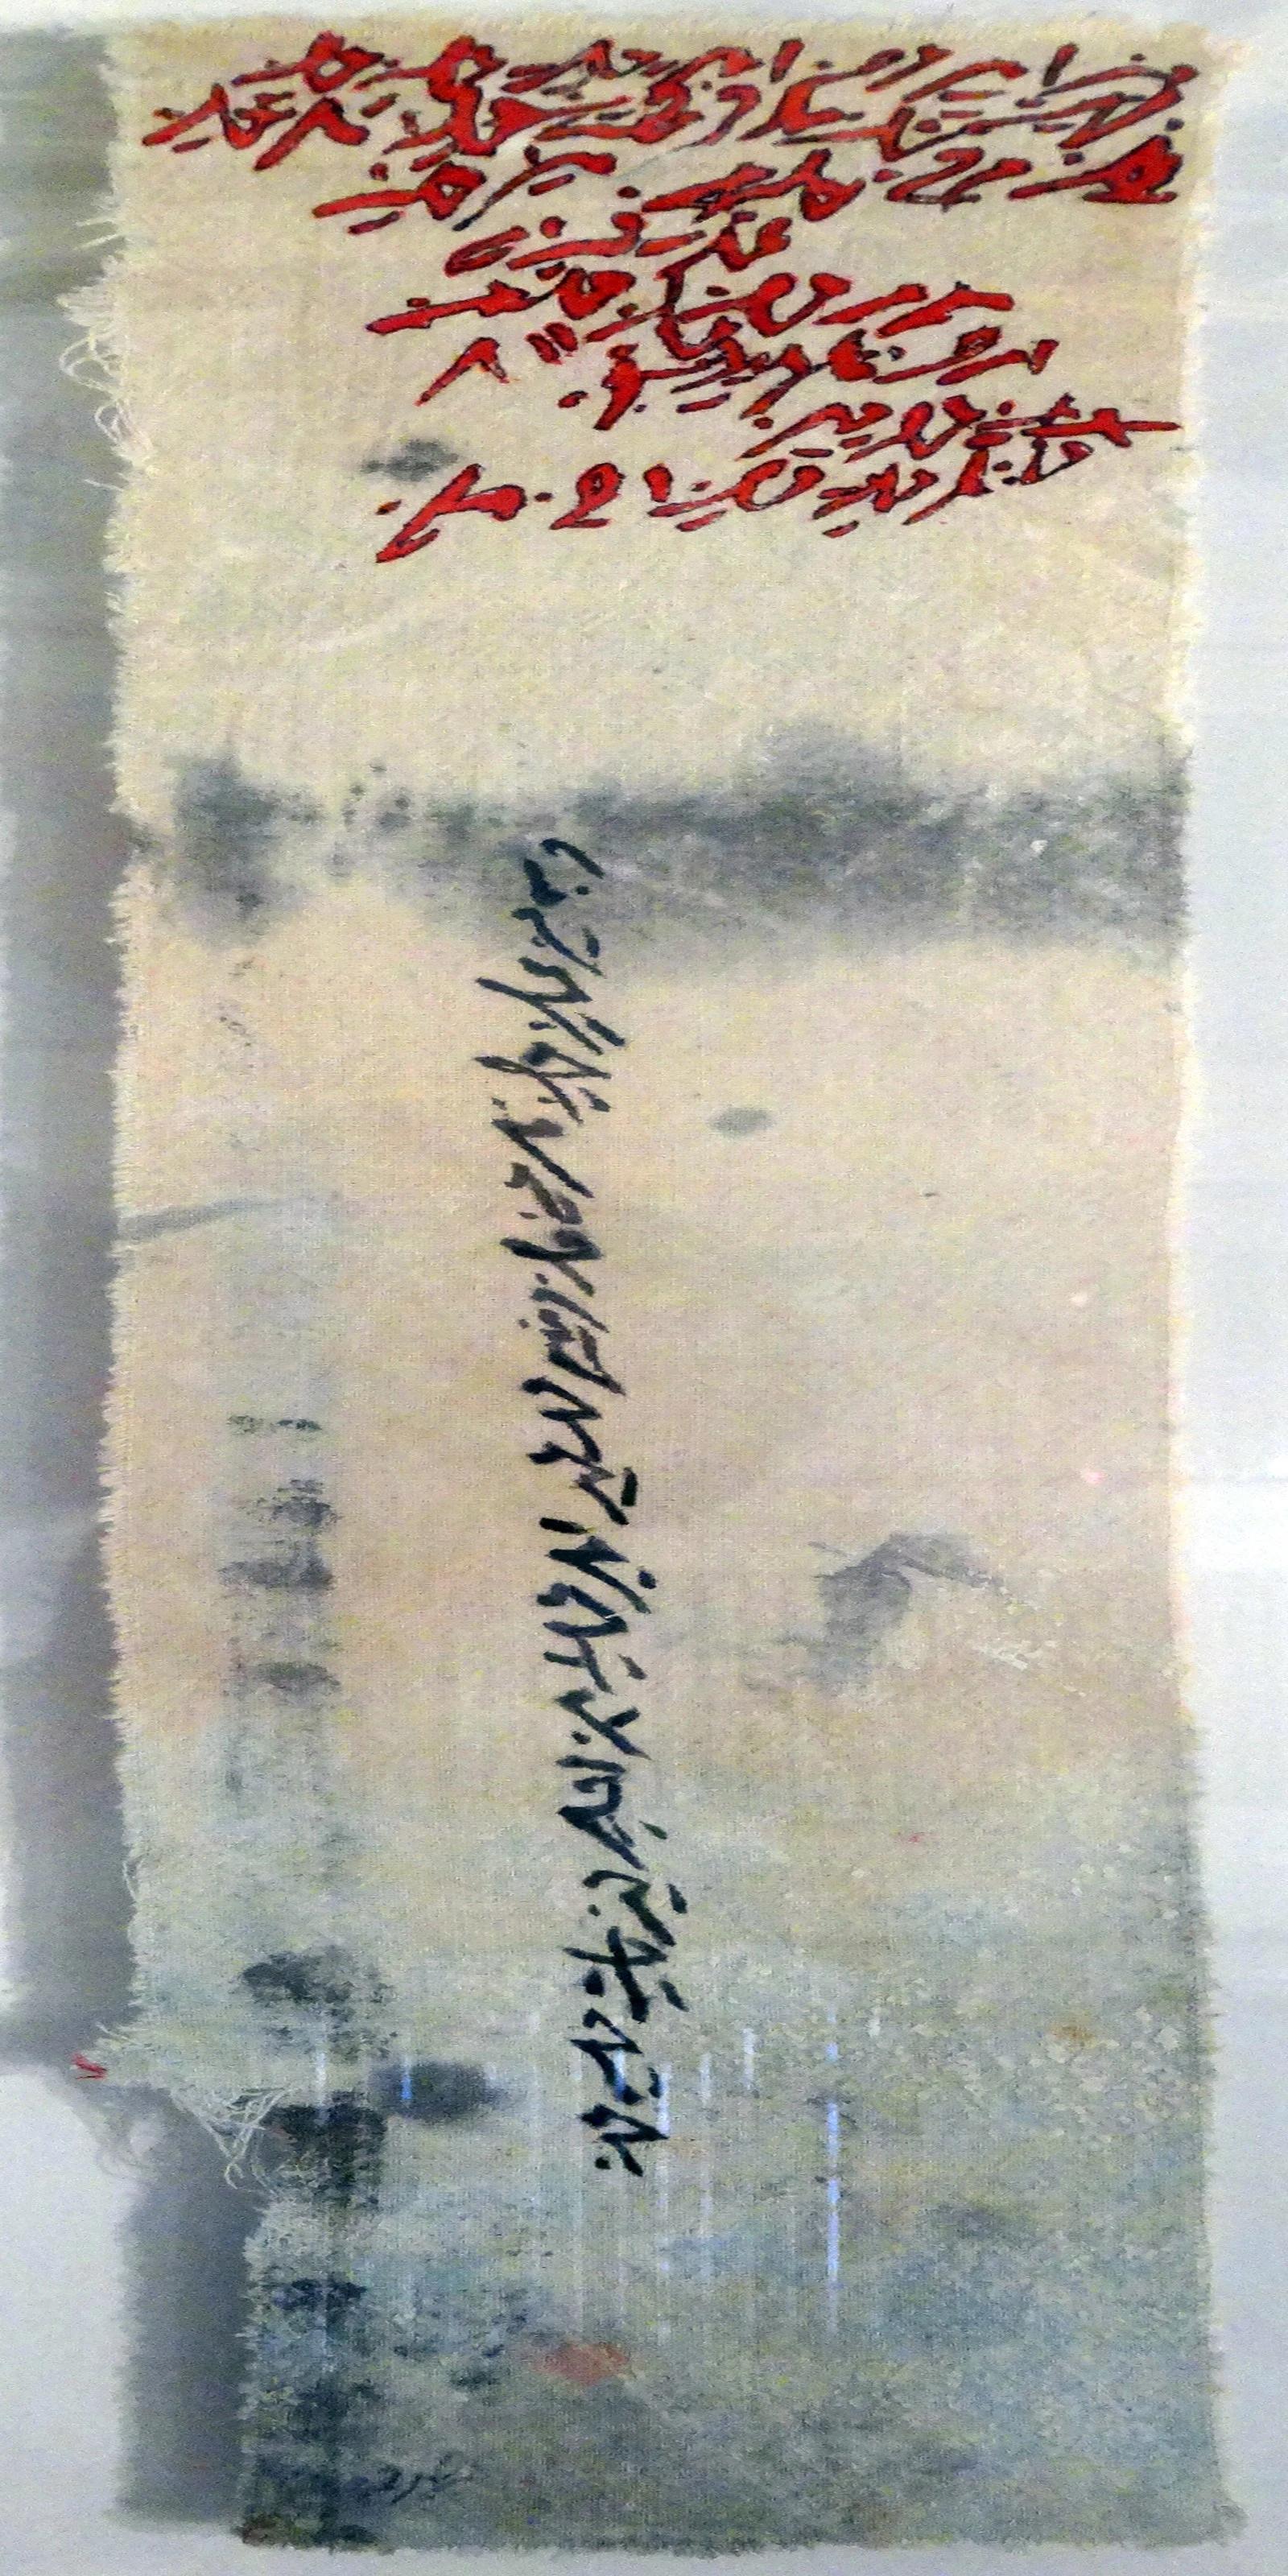 "Abstract Script" Ink on Fabric Painting 20" x 6" inch by Mohamed Monaiseer


Mohamed Monaiseer (b. Cairo, Egpyt 1989) gives body and form to immaterial phenomena with works of drawing and painting. He has exhibited in many galleries and culture